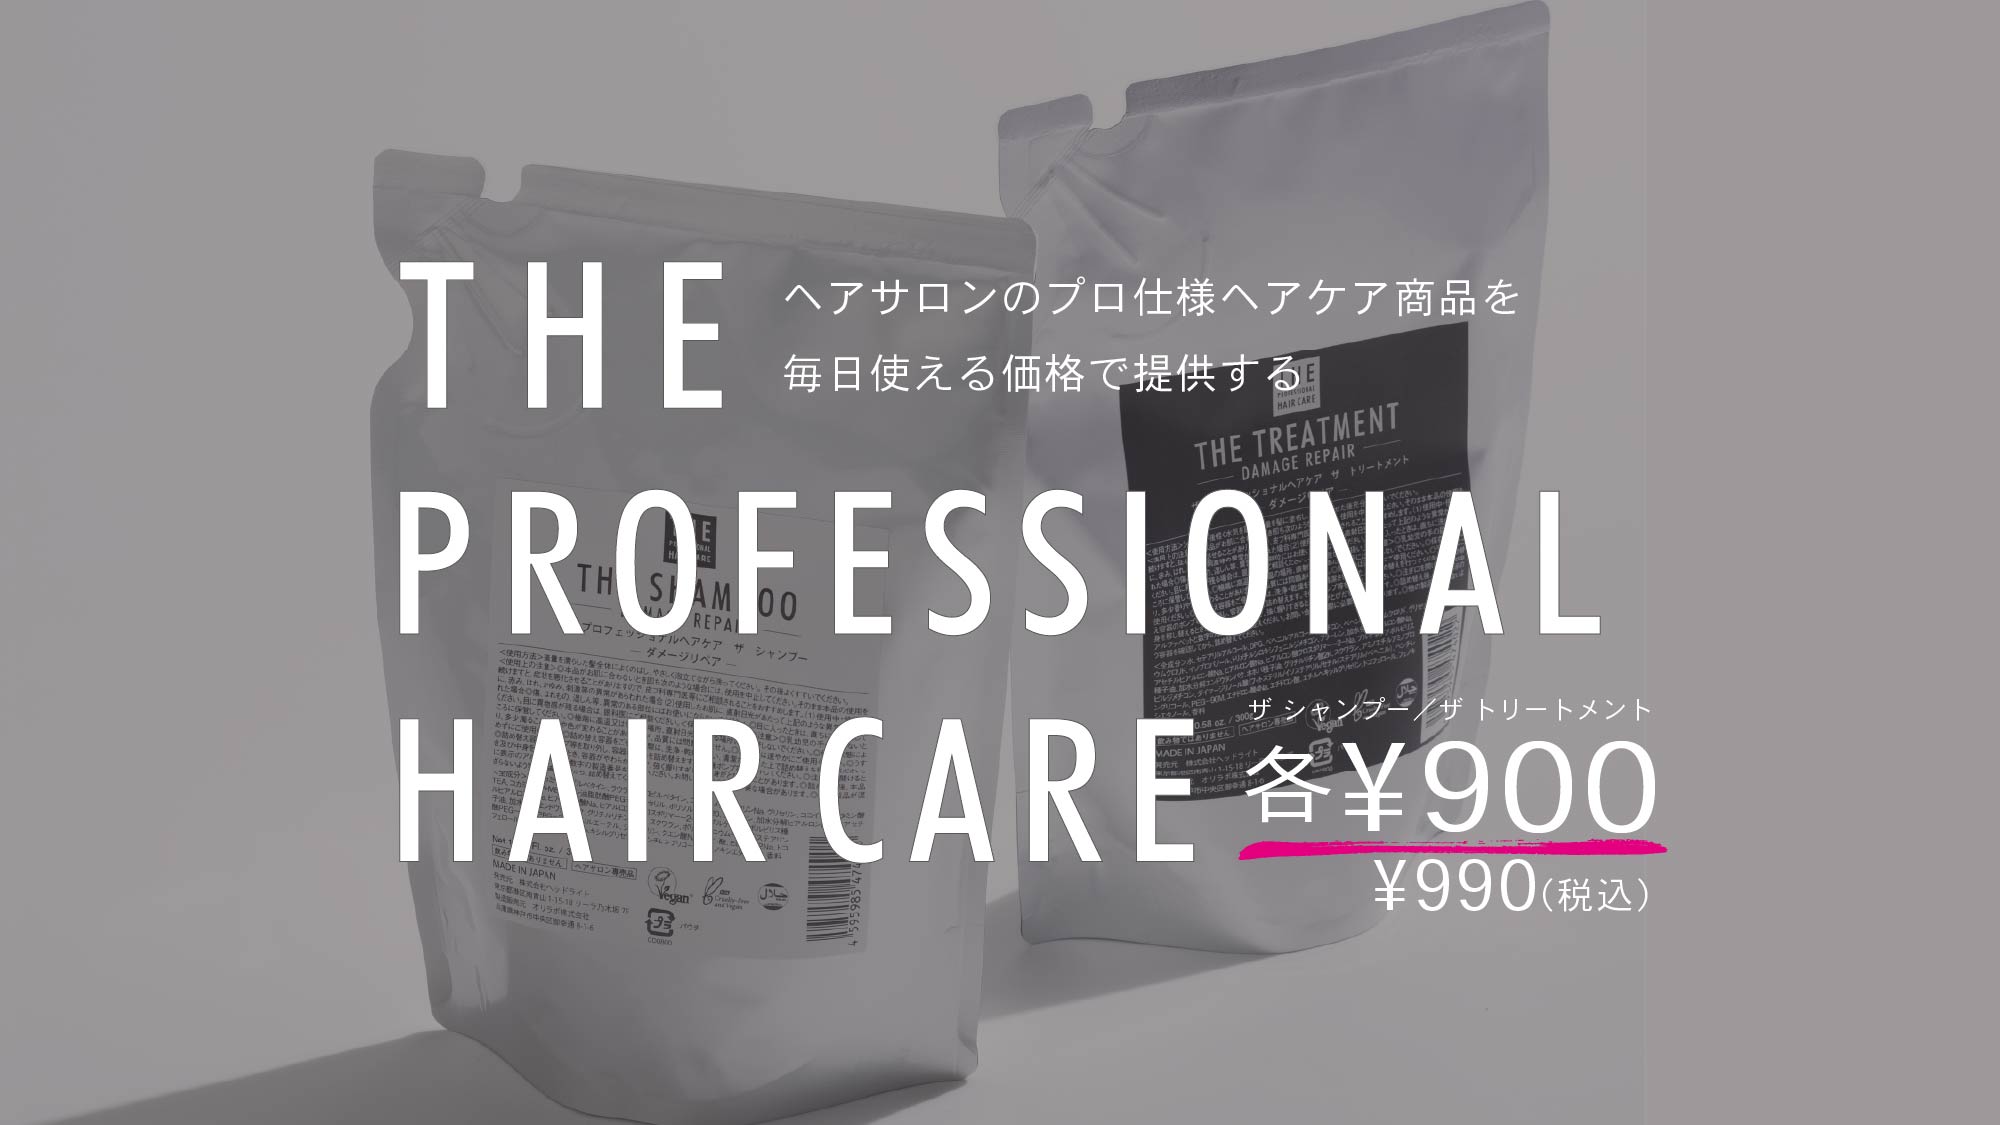 THE PROFESSIONAL HAIR CARE